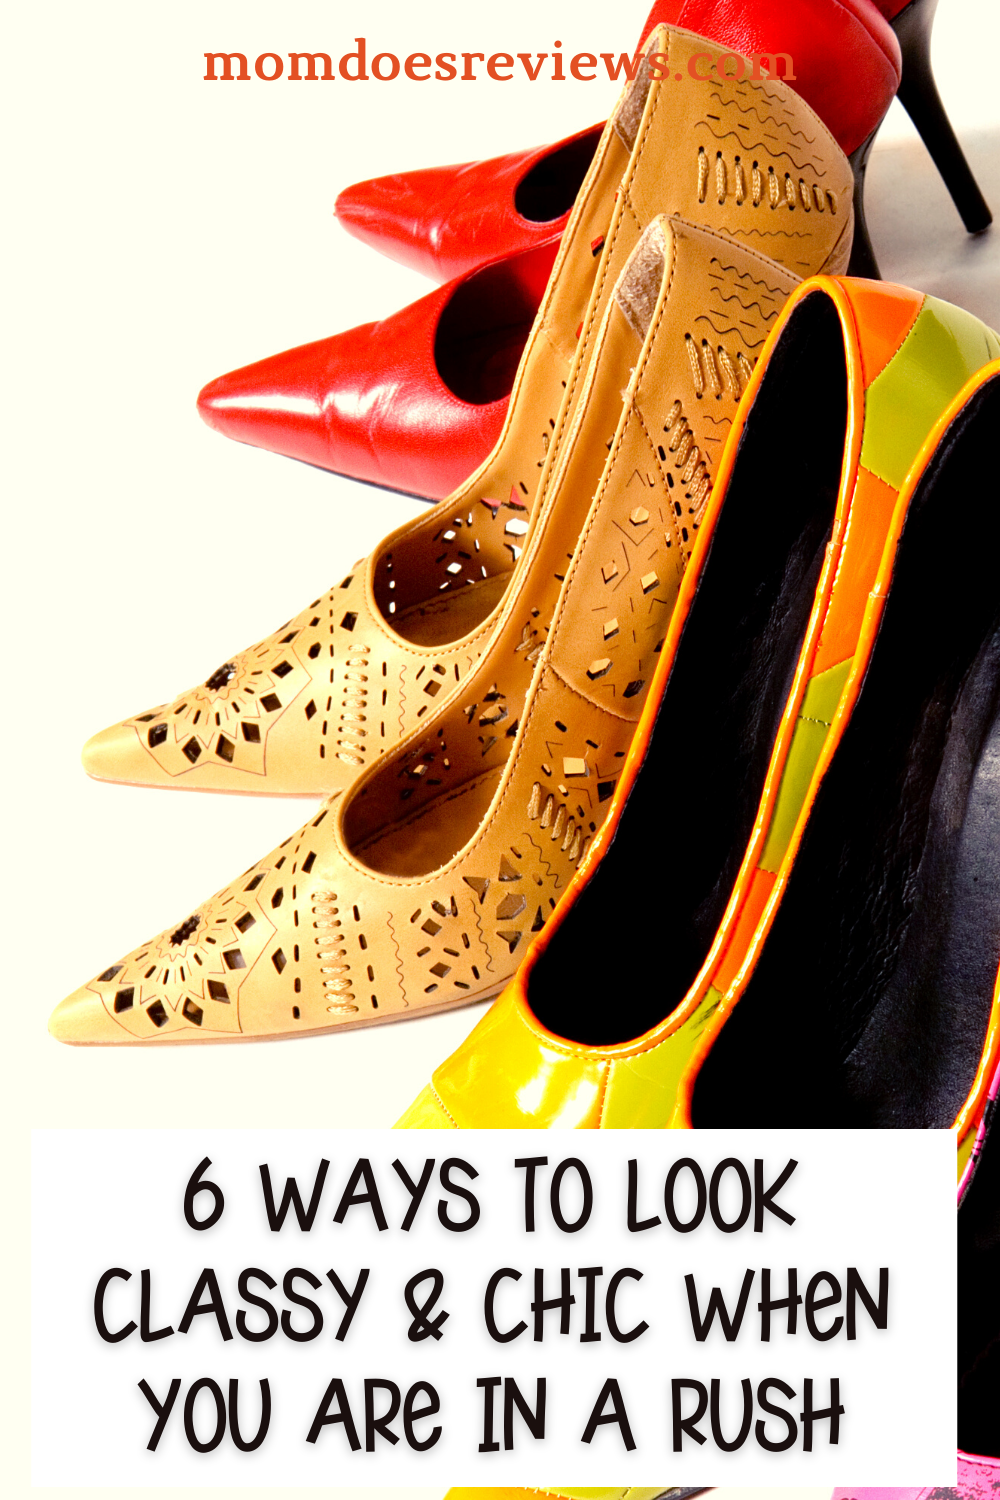 6 Ways to Look Classy & Chic When You Are in a Rush